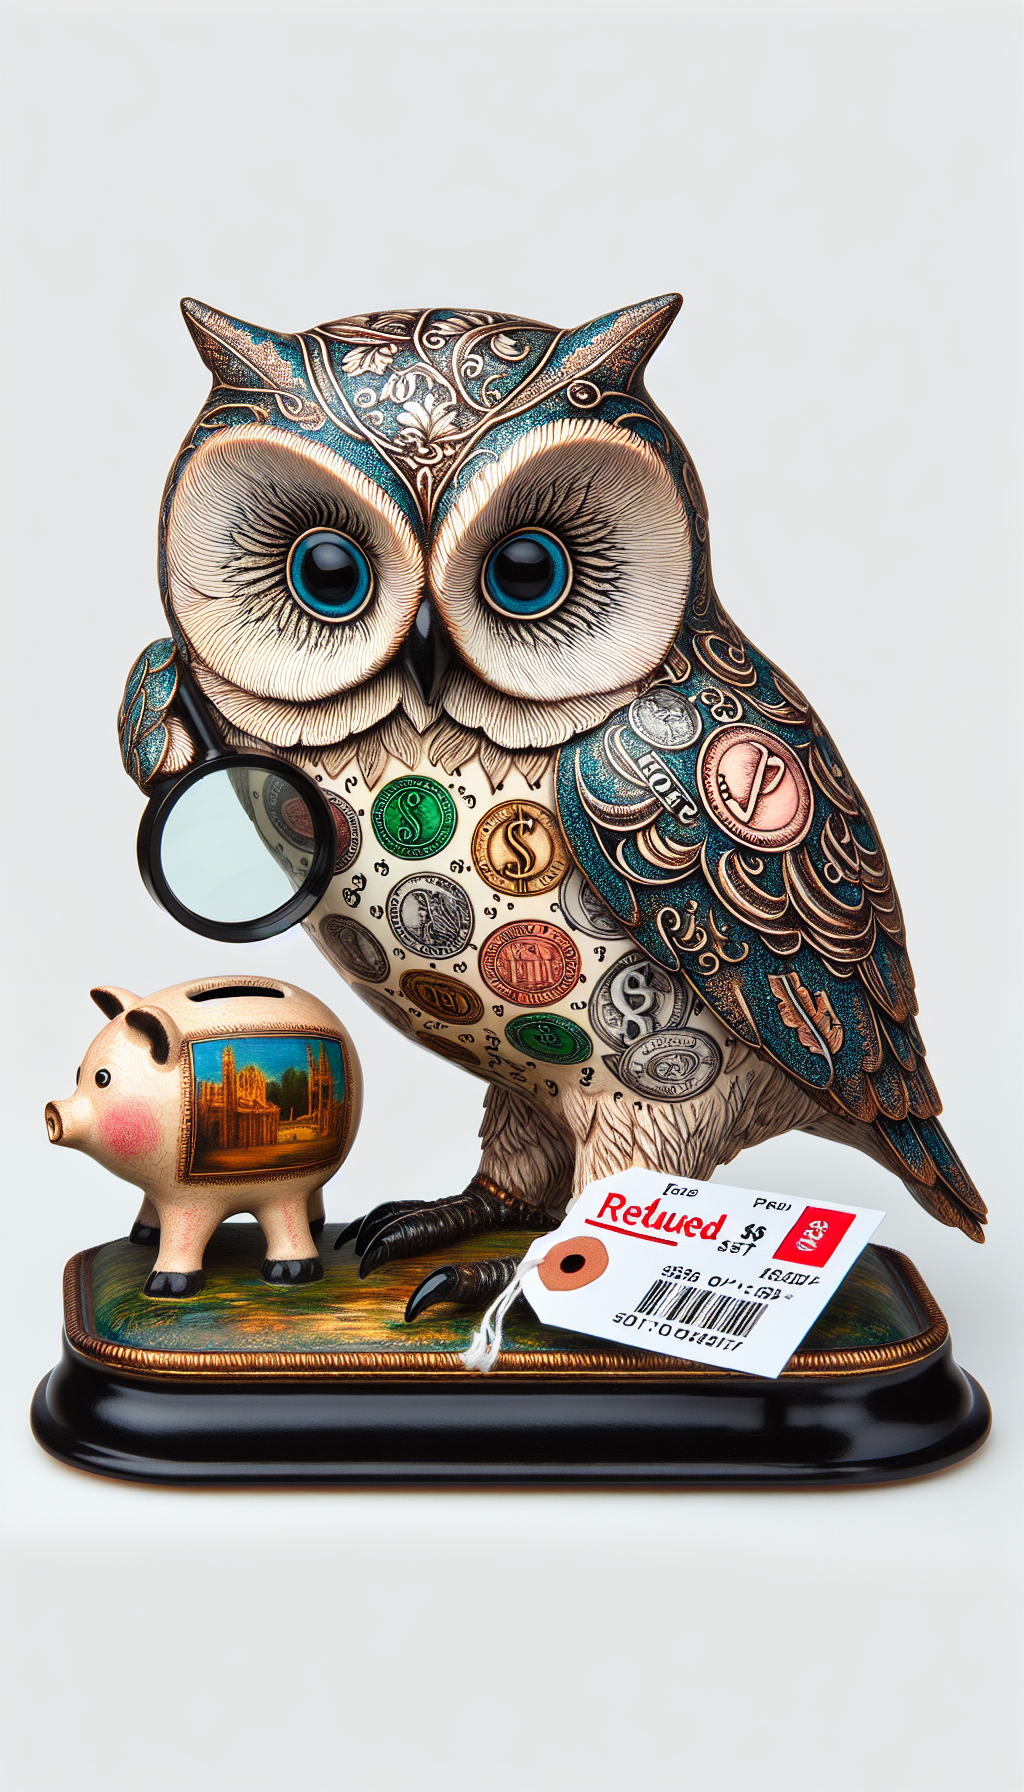 An illustration of a wise owl perched atop a piggy bank, each feather subtly painted with currency symbols. The owl holds a magnifying glass in one talon, inspecting a miniature, classic painting, juxtaposed with a price tag showing a slashed amount, capturing the essence of thrifty yet quality art appraisals.